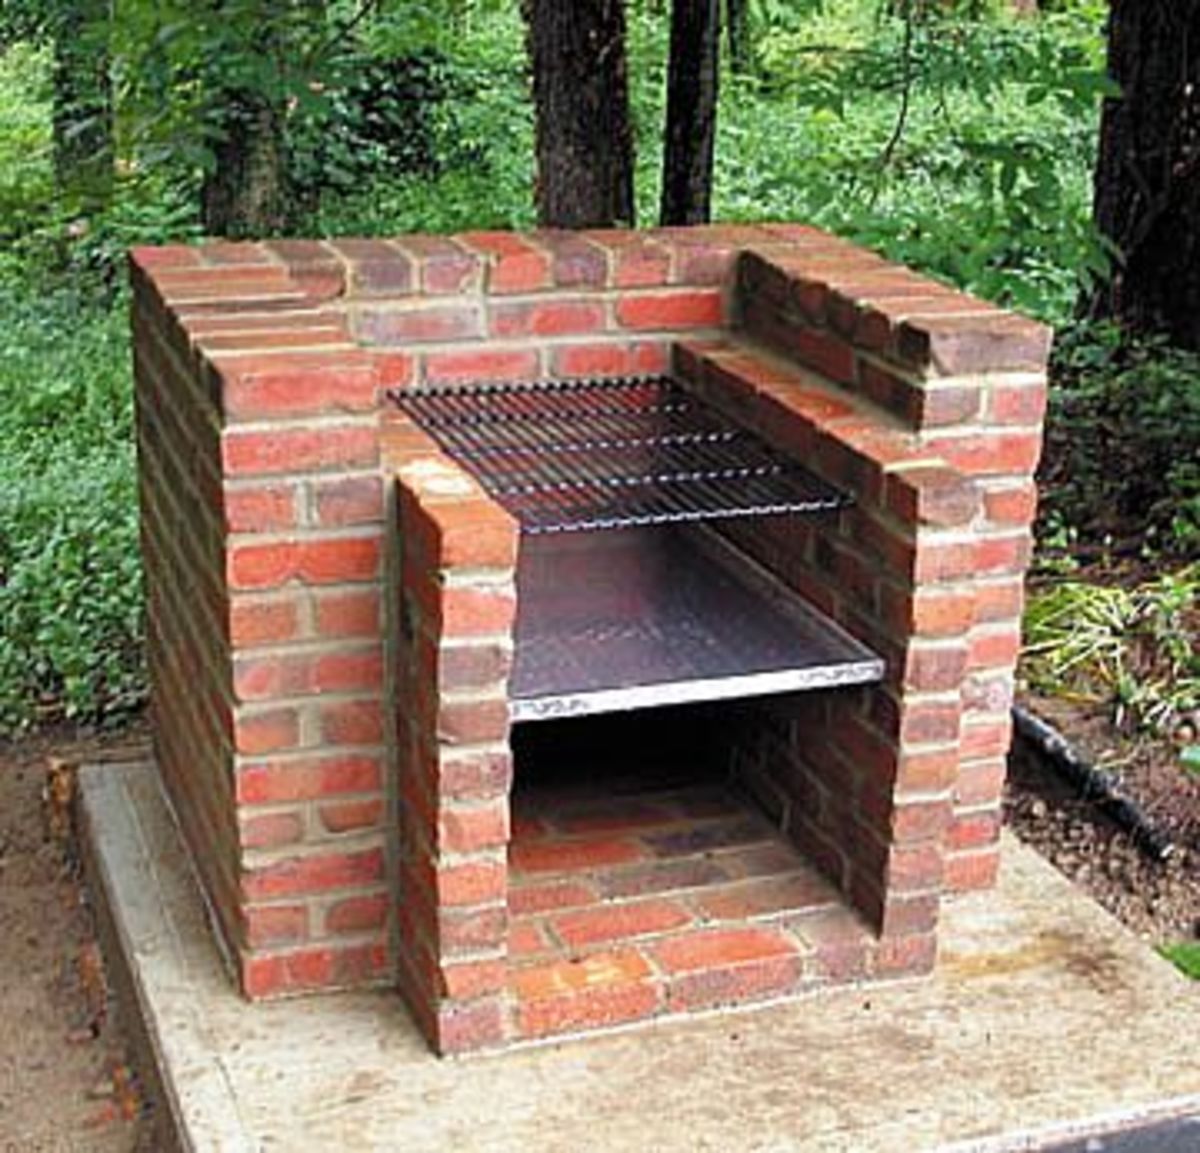 How To Build An Outdoor Brick Bbq Grill, Build A Brick Fire Pit Grill